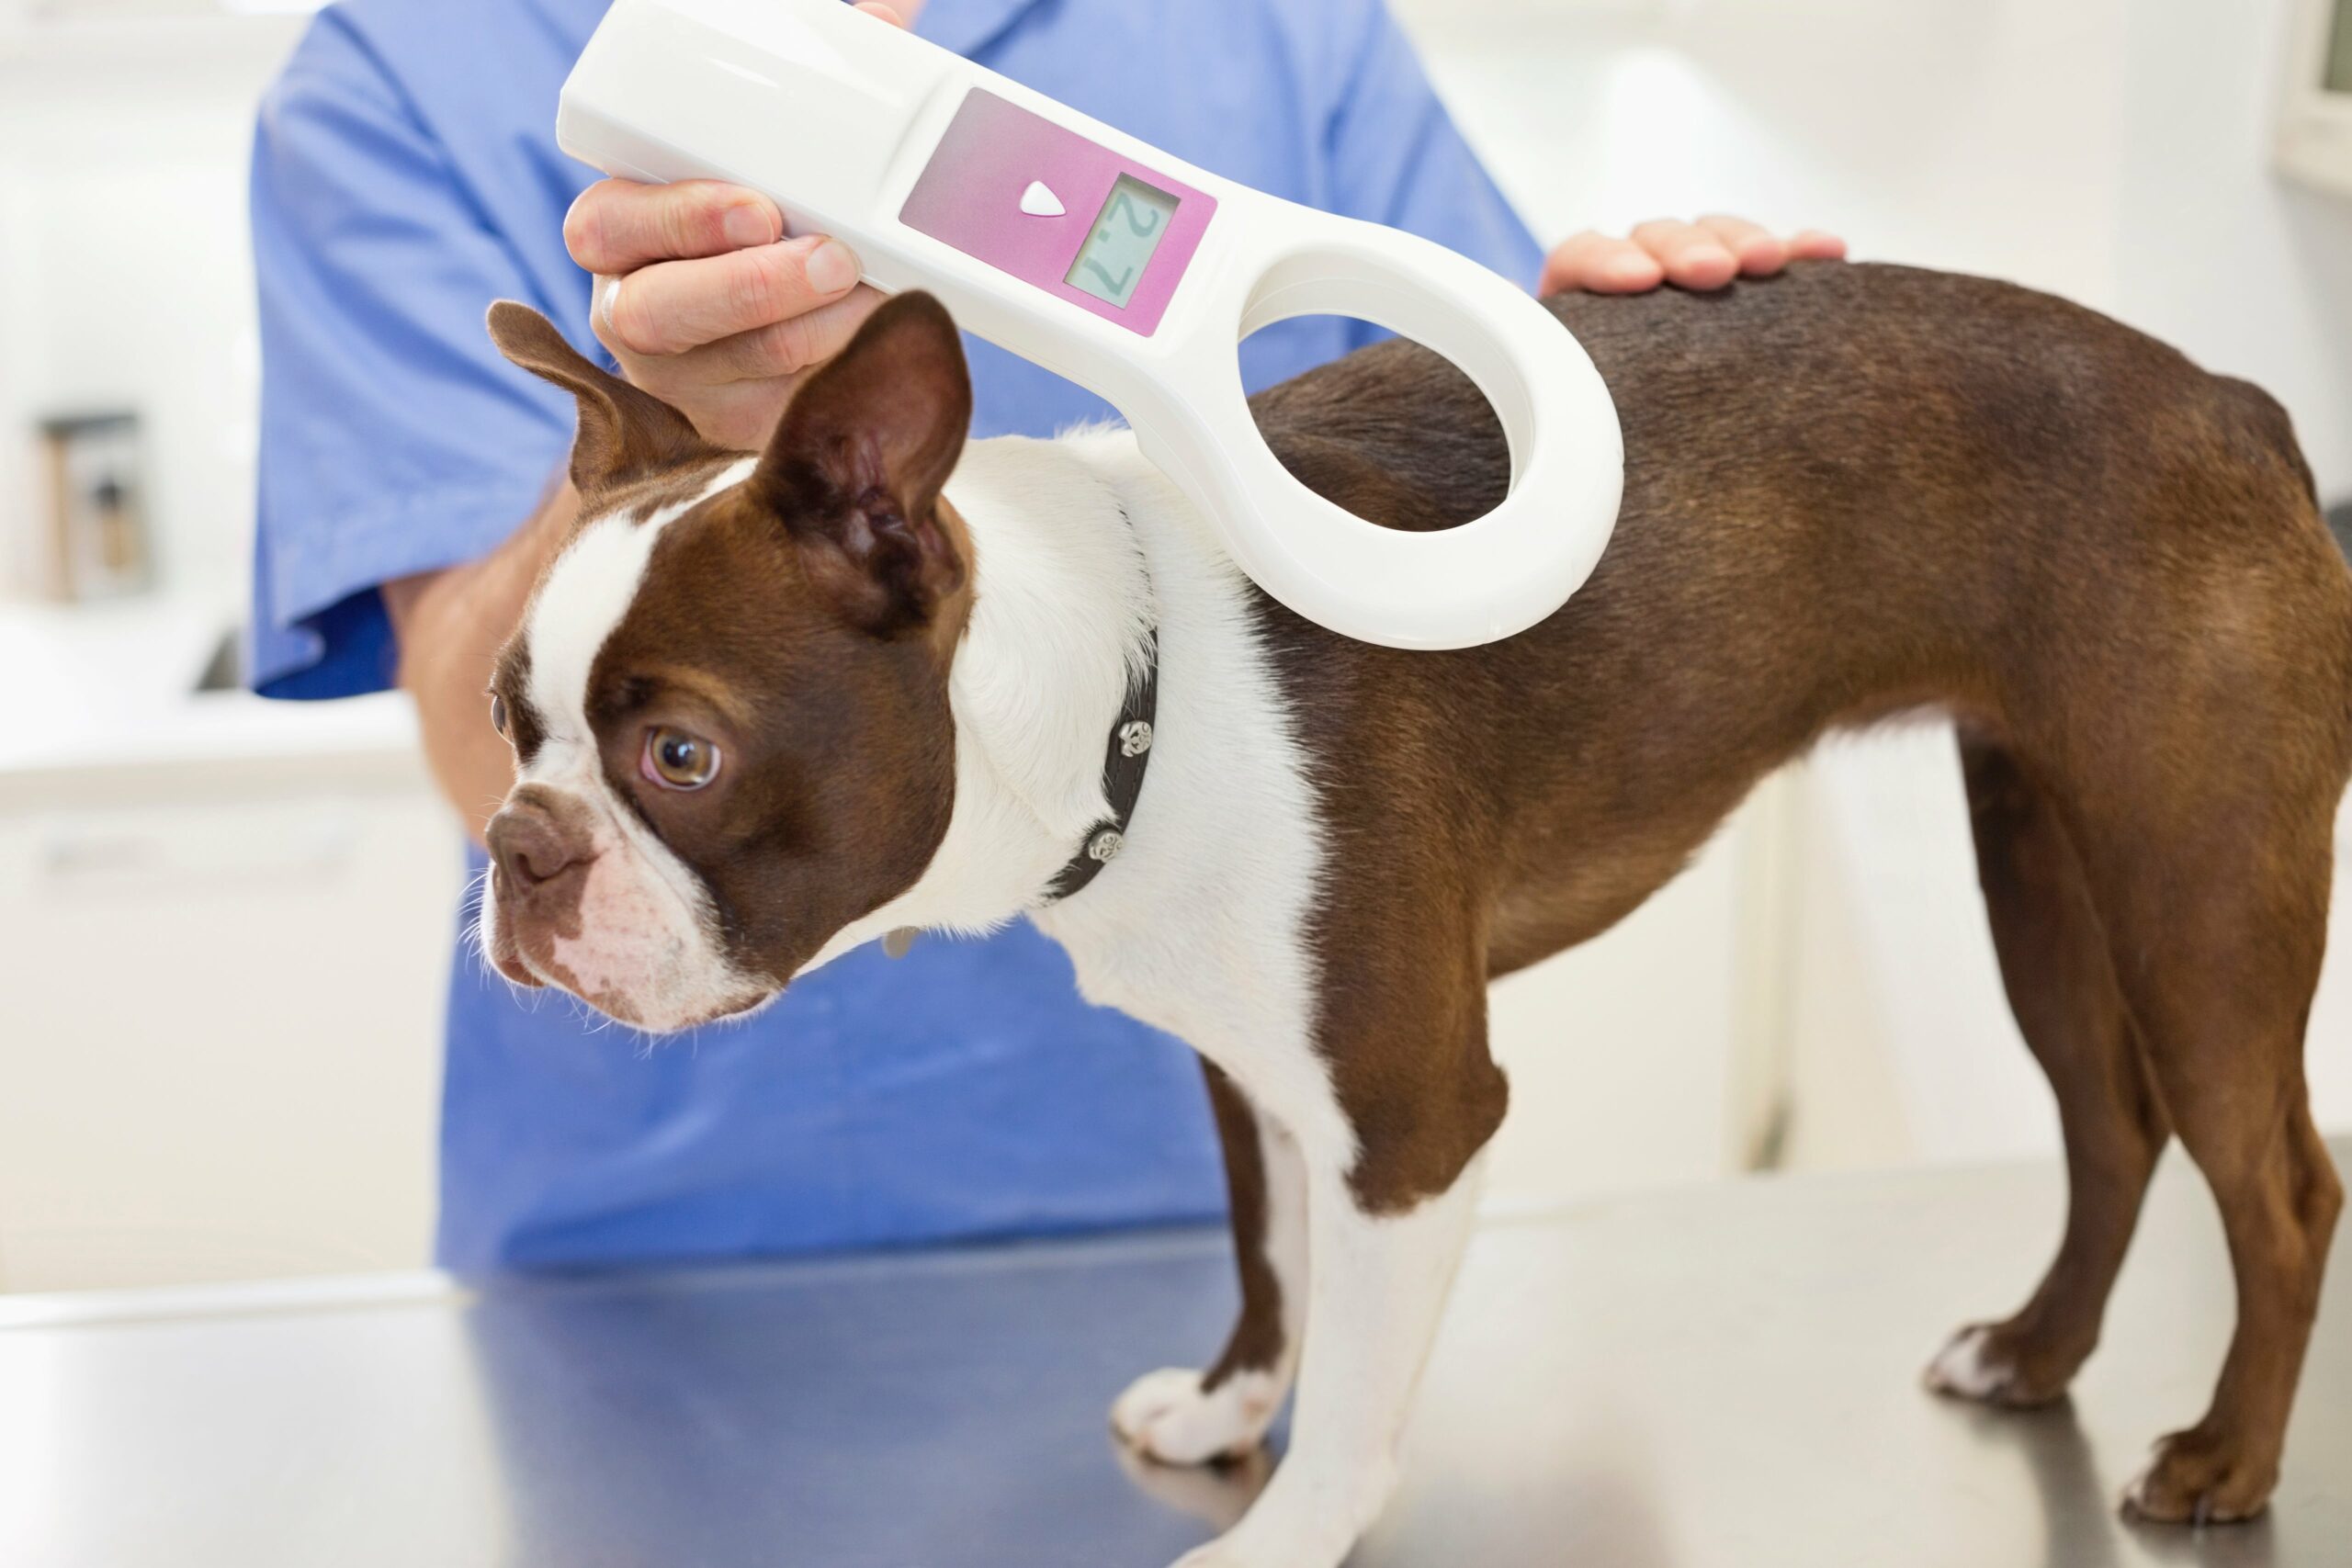 Why Should You Get Your Pet Microchipped? | Avalon Dental, your Carson and El Segundo Dentist